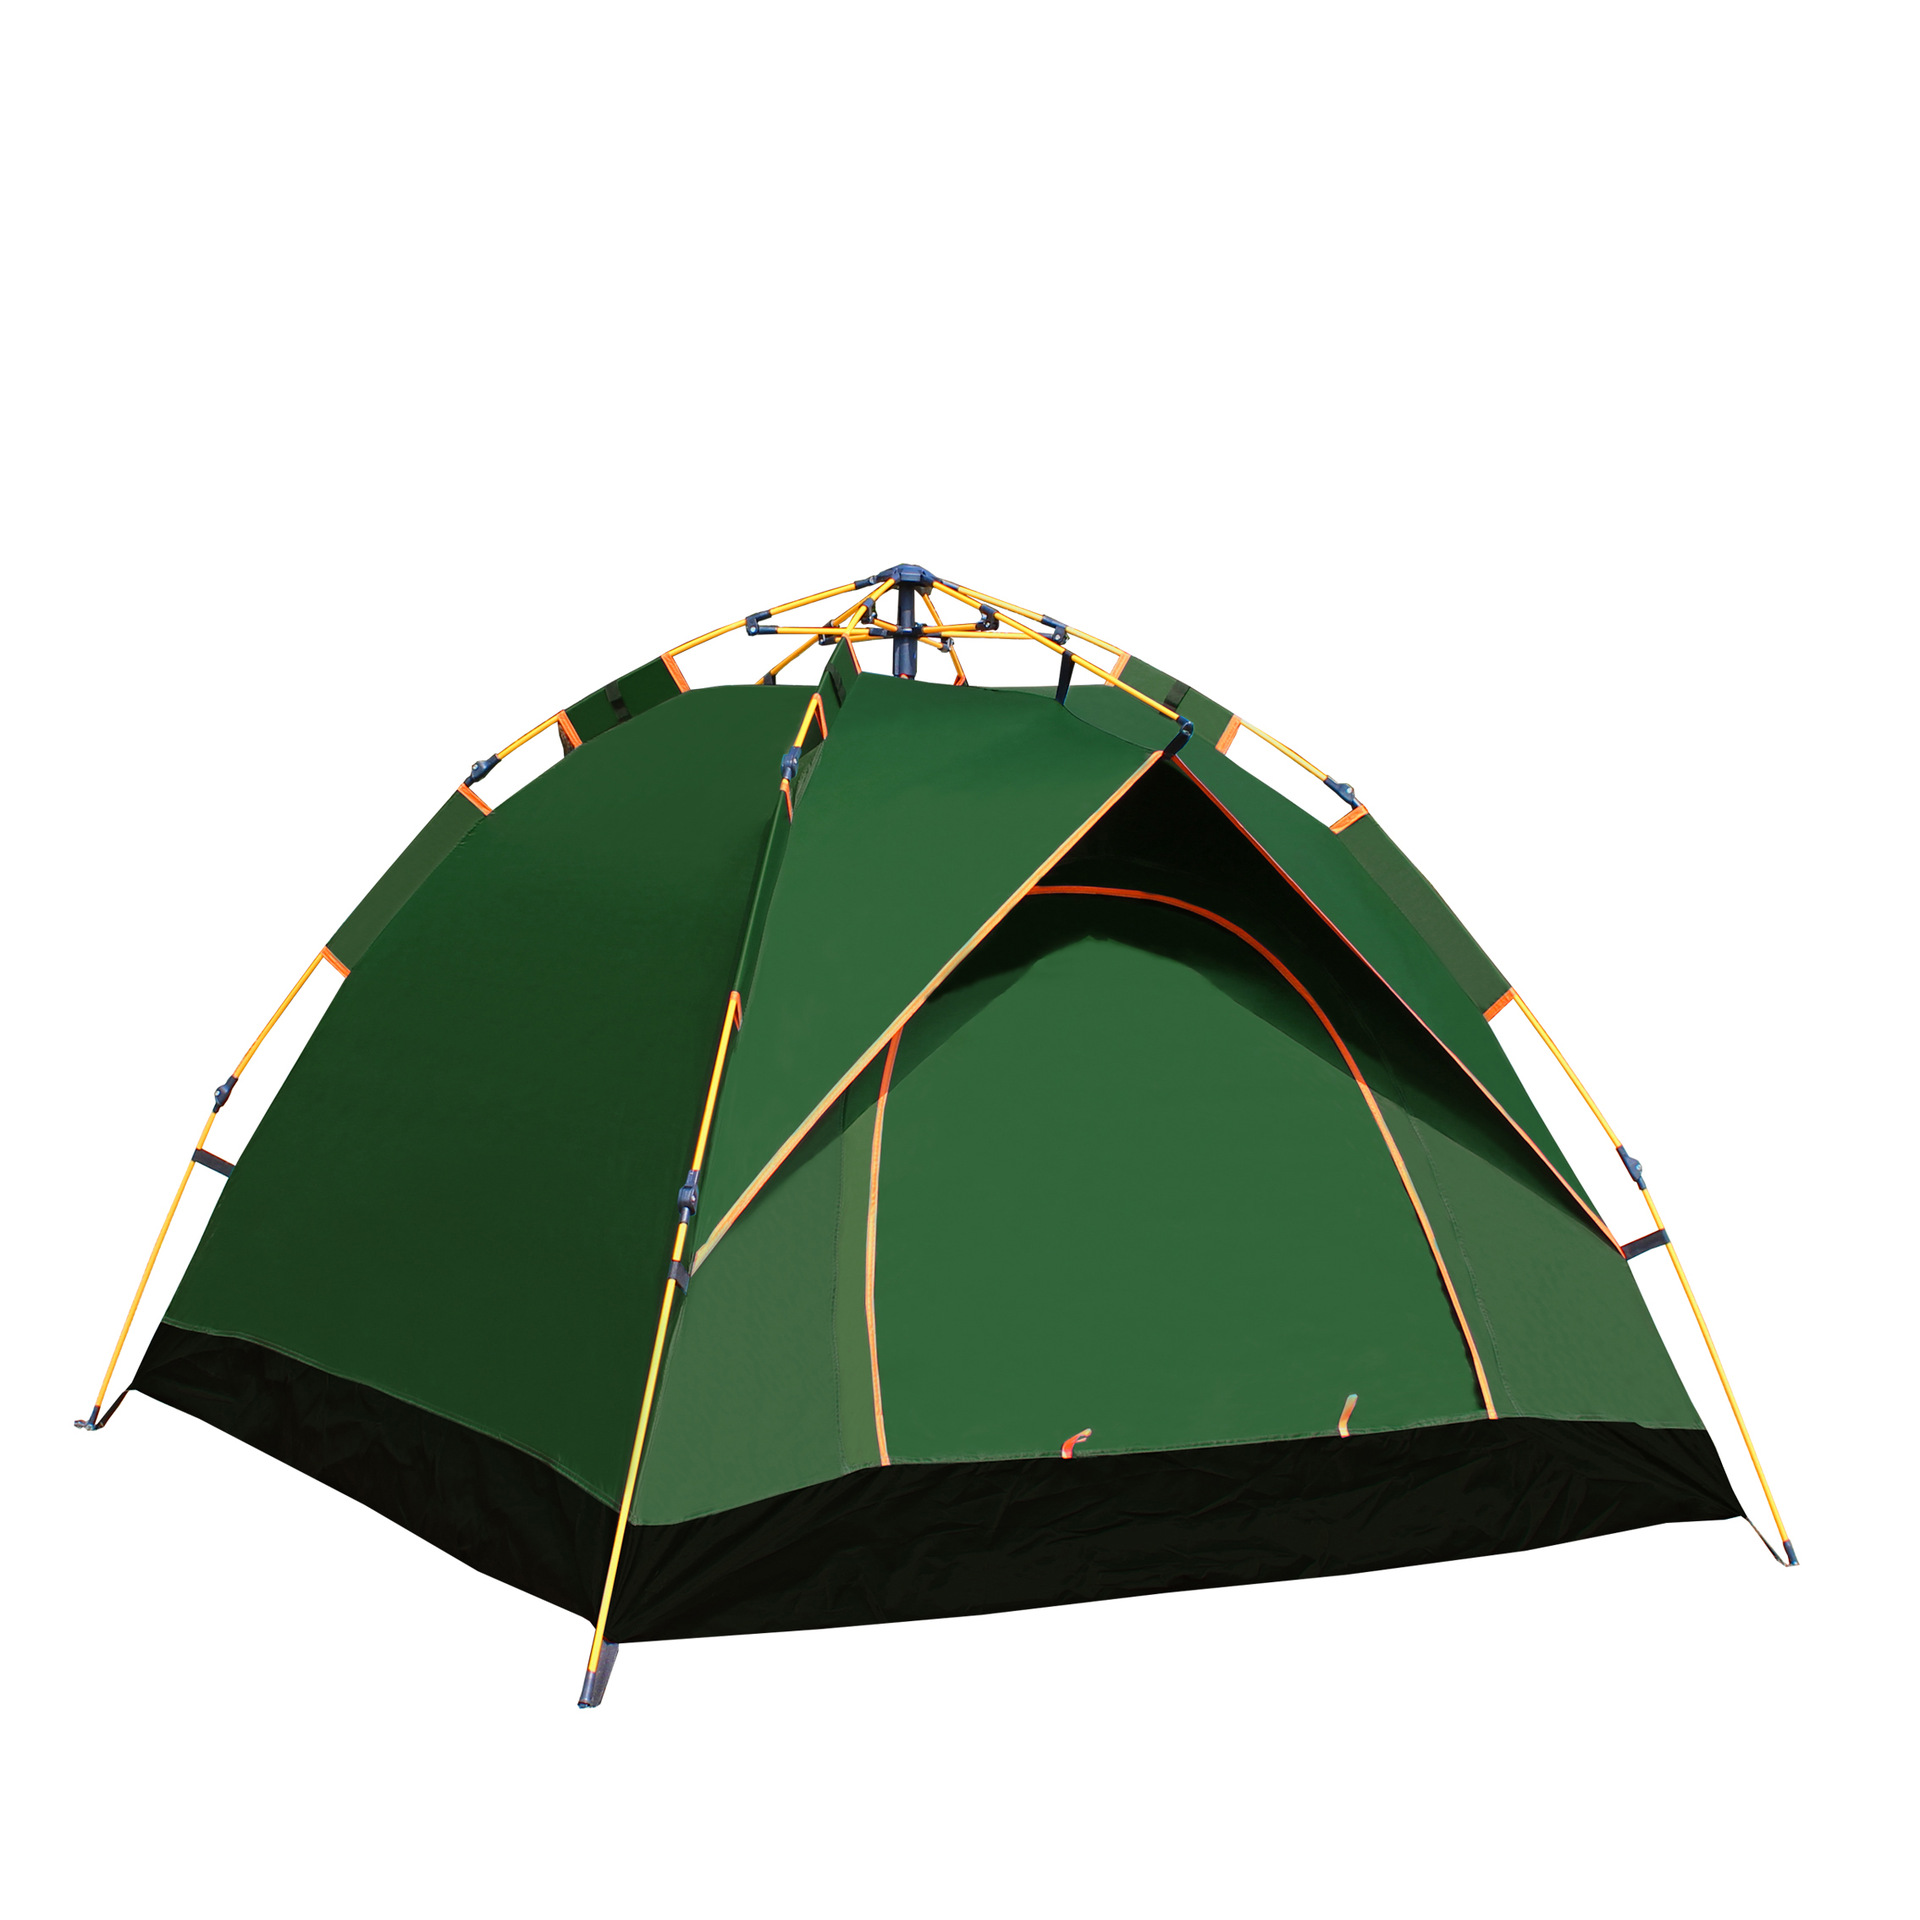 Tent Outdoor 3-4 People Automatic Quickly Open Camping Camping Indoor Outdoor 2 People Small House Game Fishing Tent